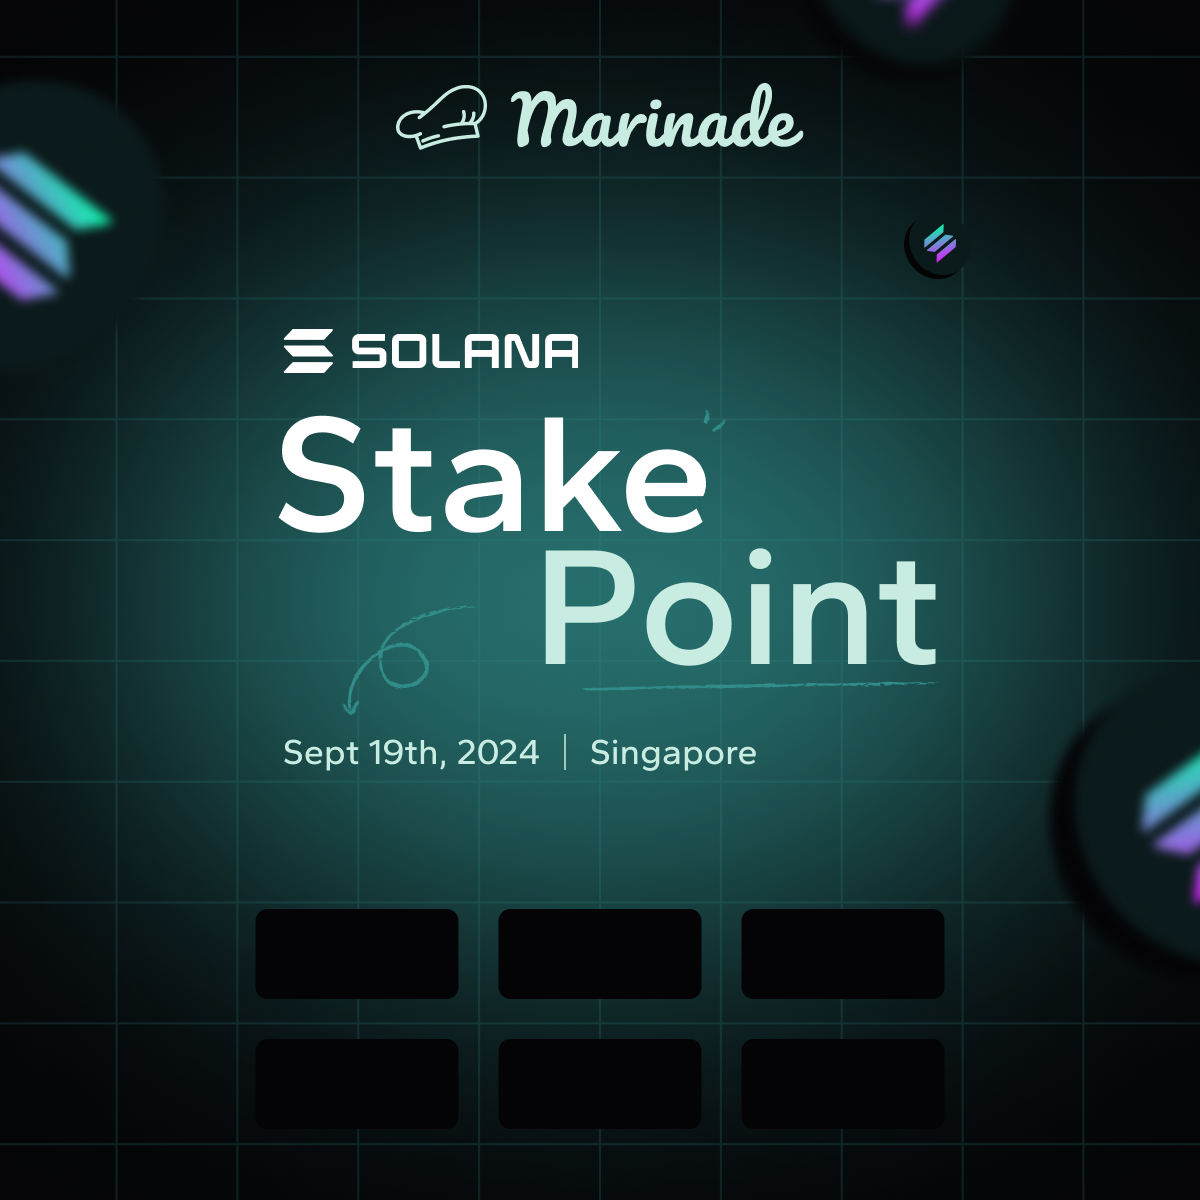 StakePoint, presented by Marinade